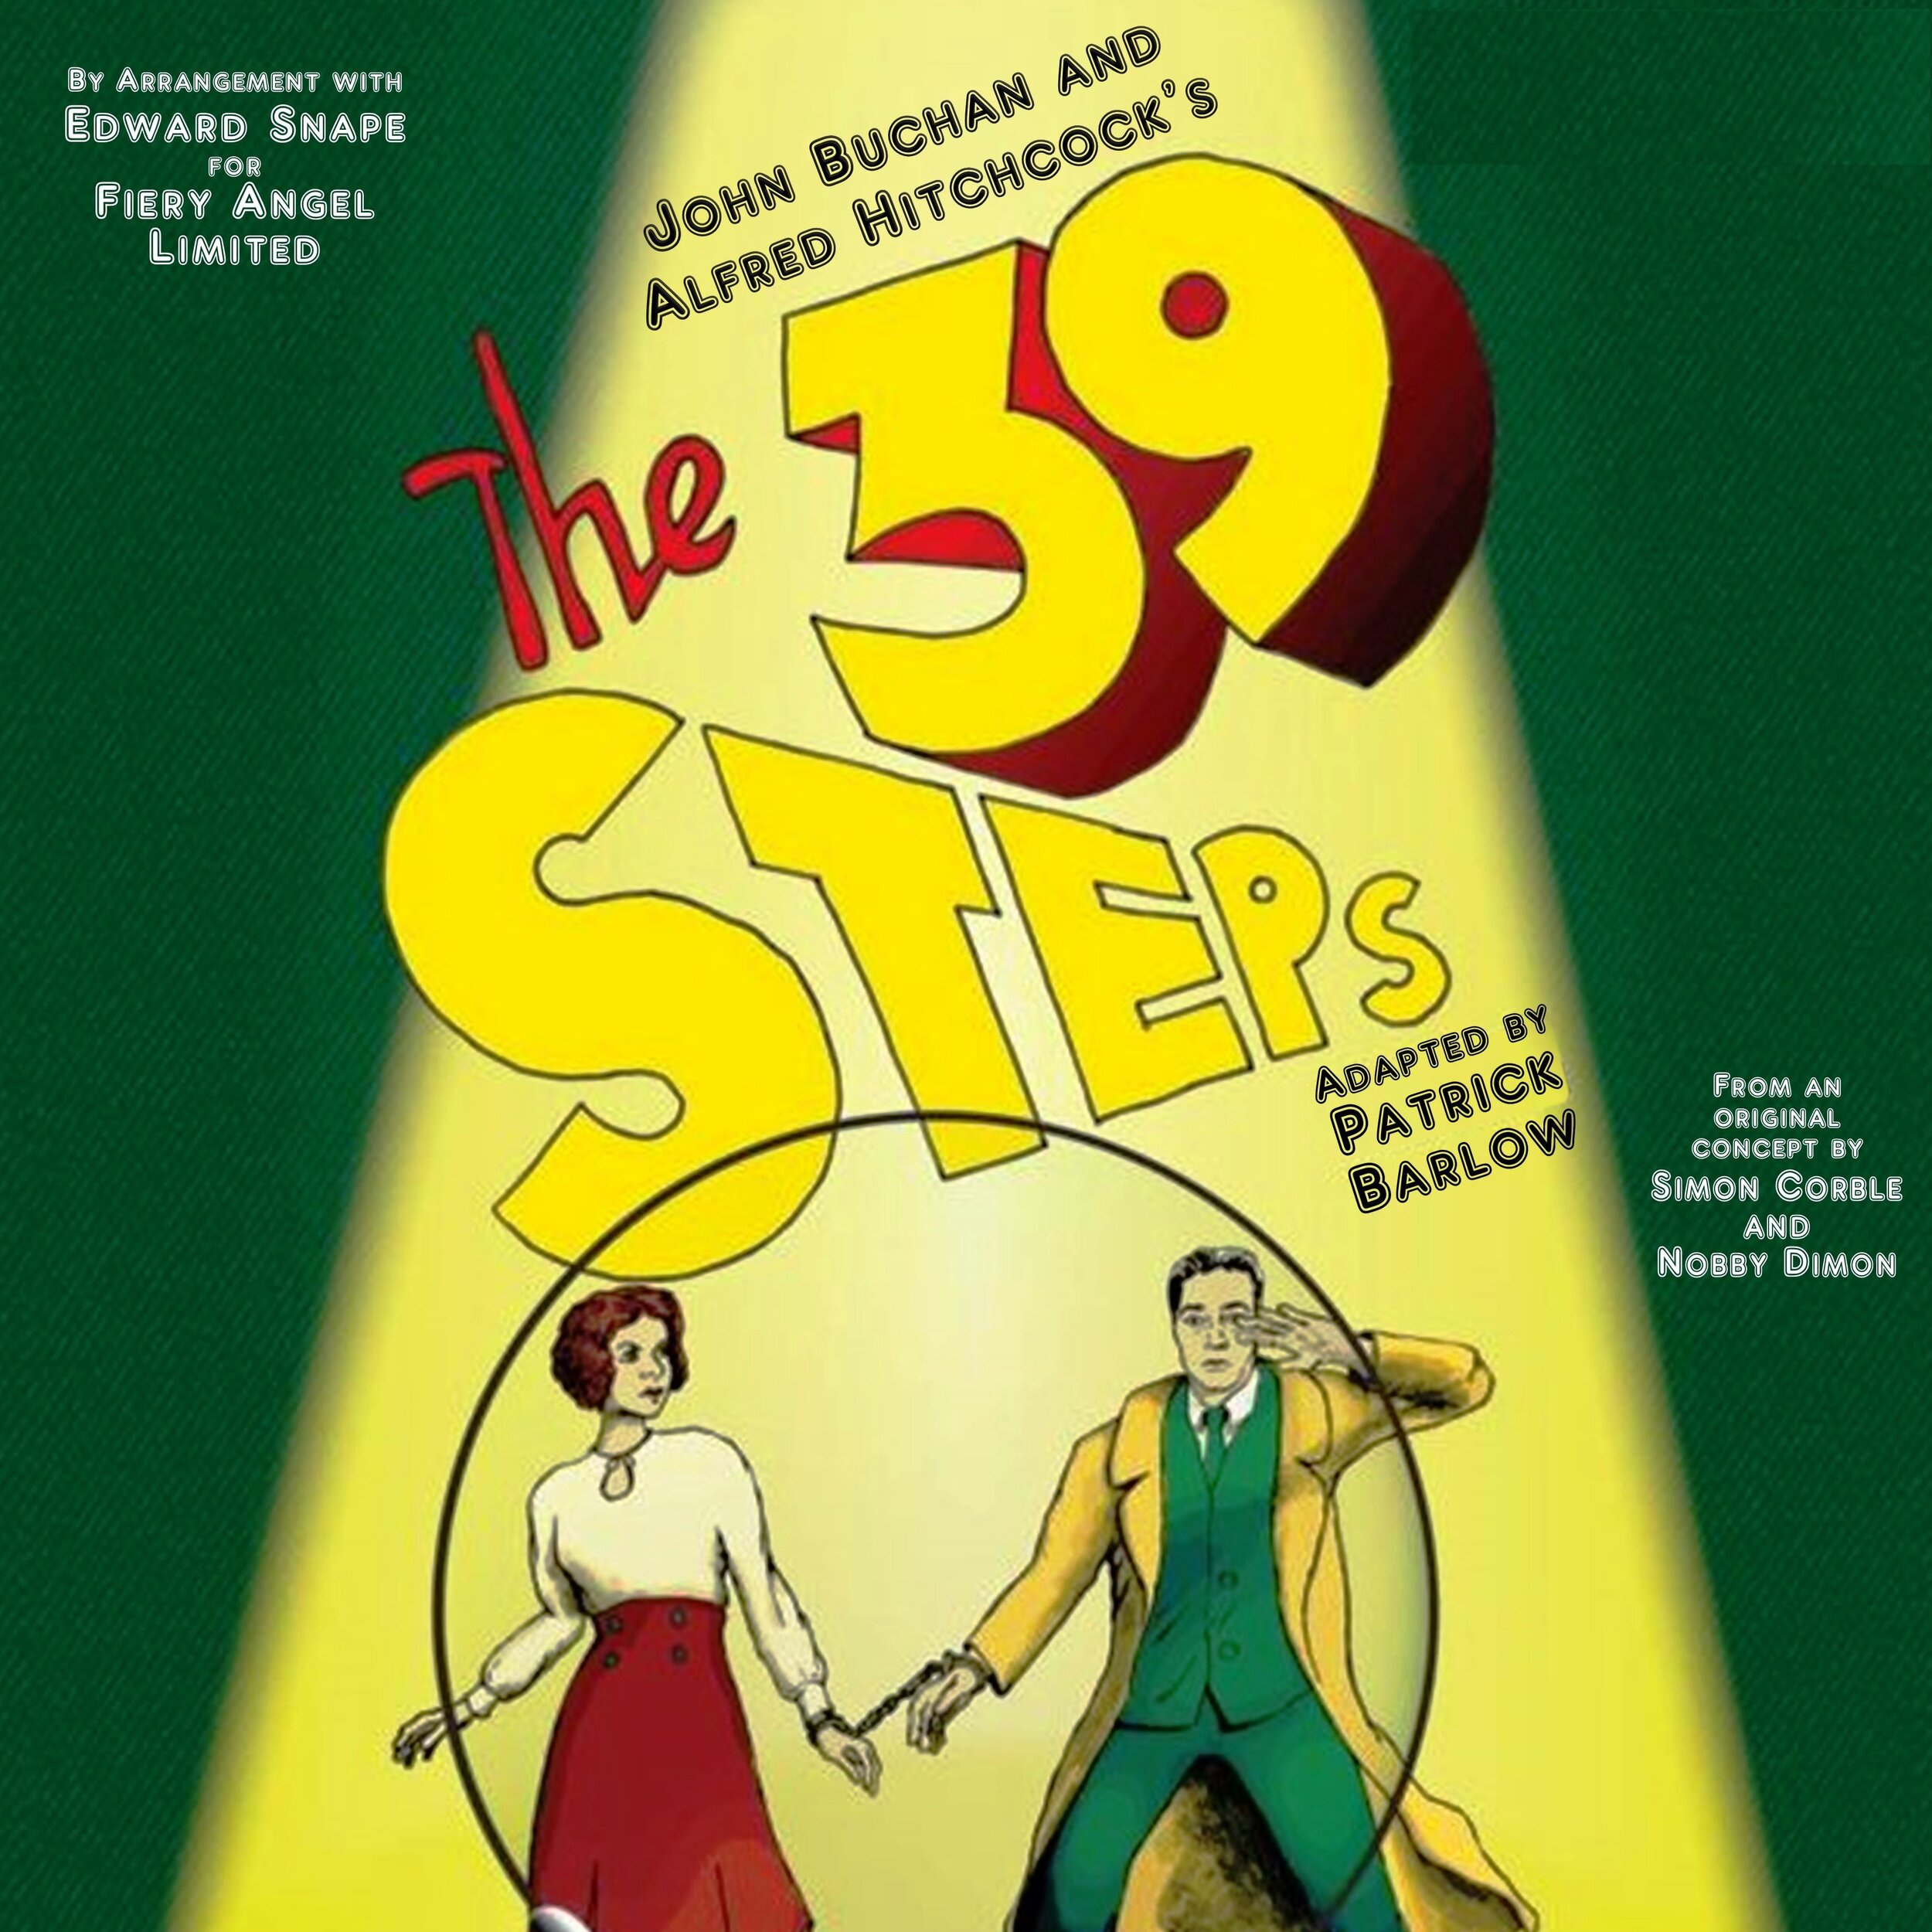 The 39 Steps - Audition Date Sunday 5th September 2021, 6.30pm